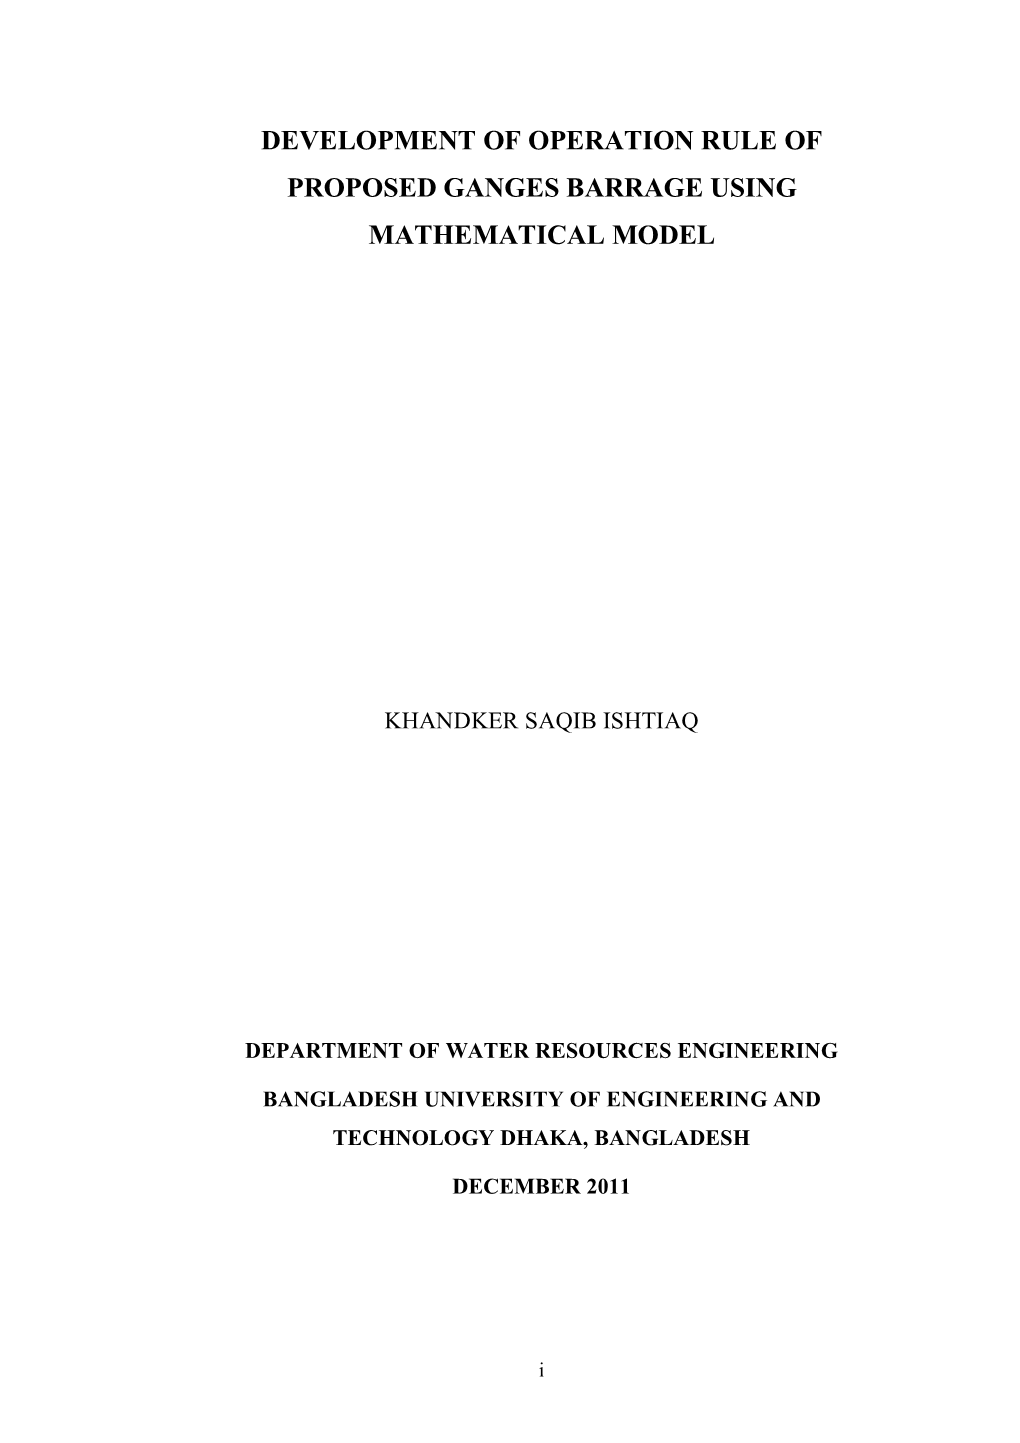 Development of Operation Rule of Proposed Ganges Barrage Using Mathematical Model